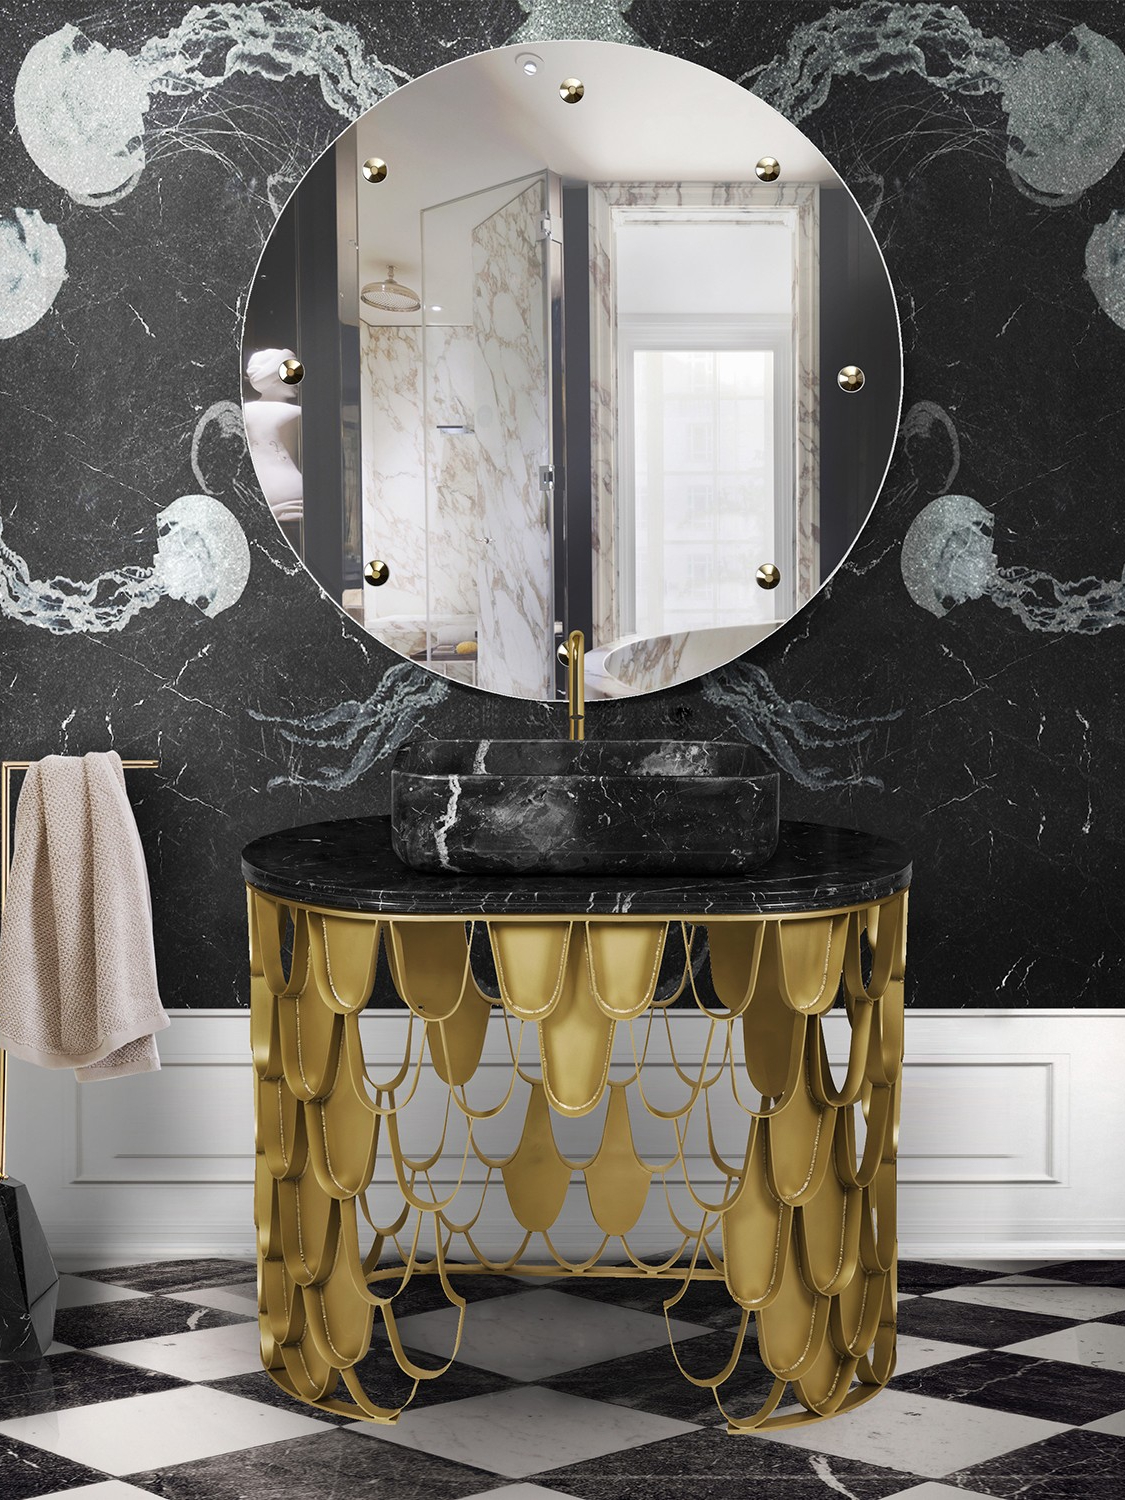 A Guest Bathroom Design To Amaze: Intense Looks And Sensations - Home'Society